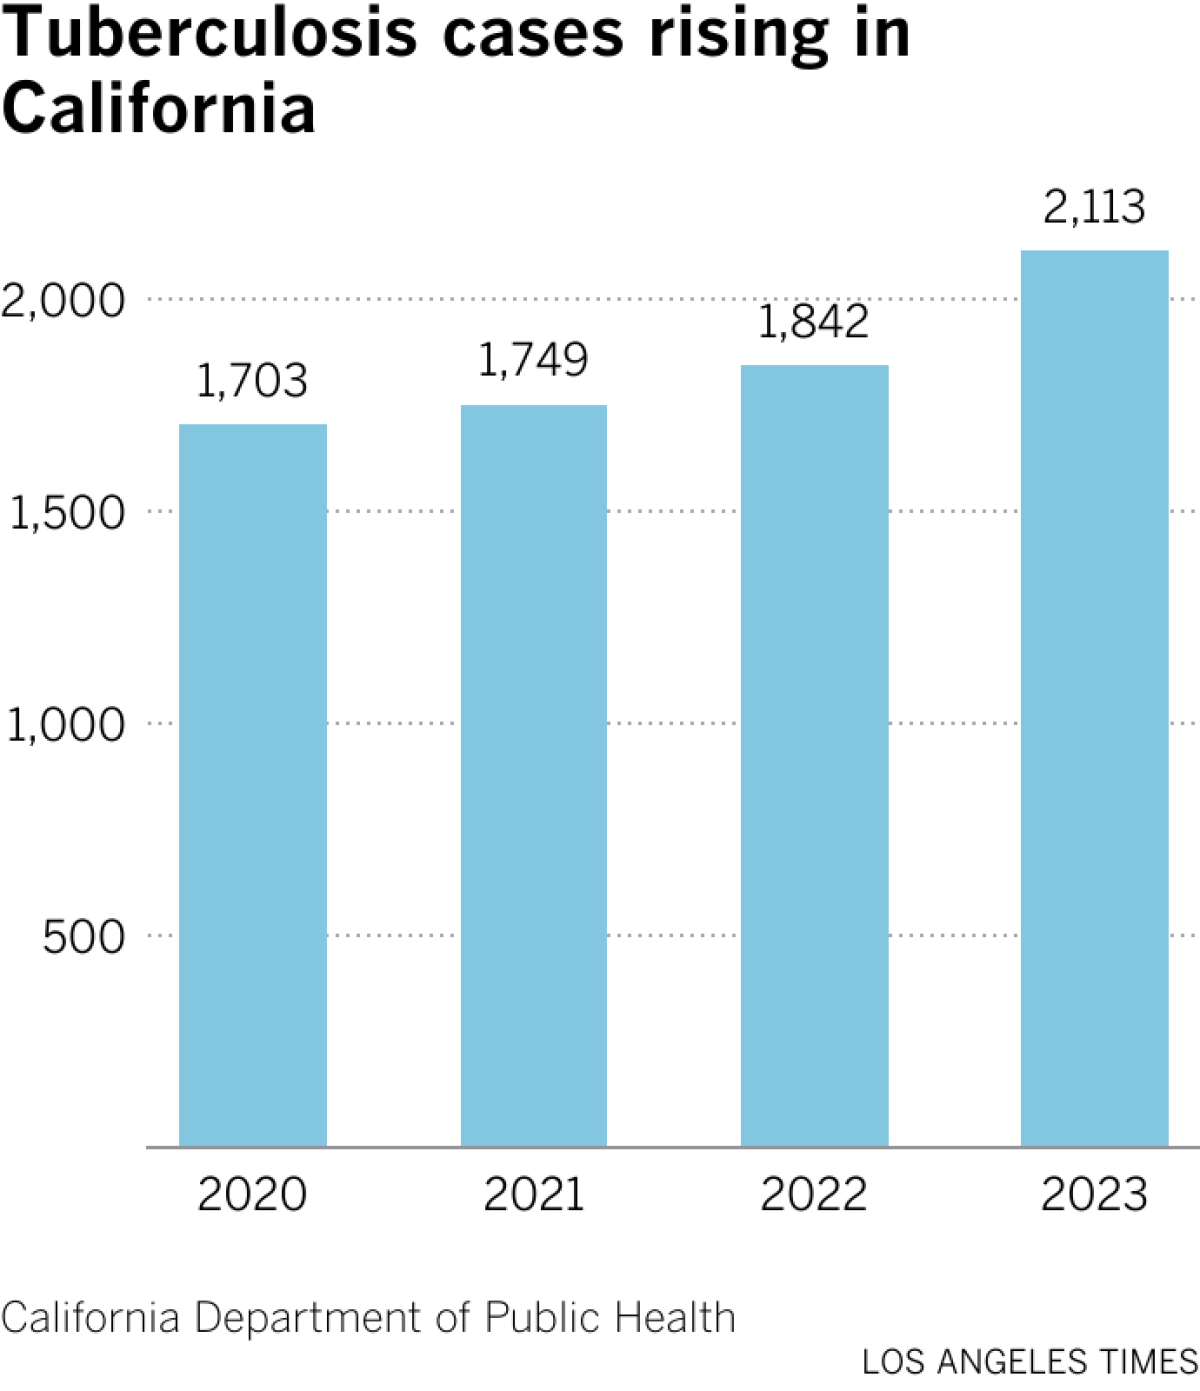 Chart shows tuberculosis cases have been rising each year since 2020. In 2023, there were 2,113 cases in California.